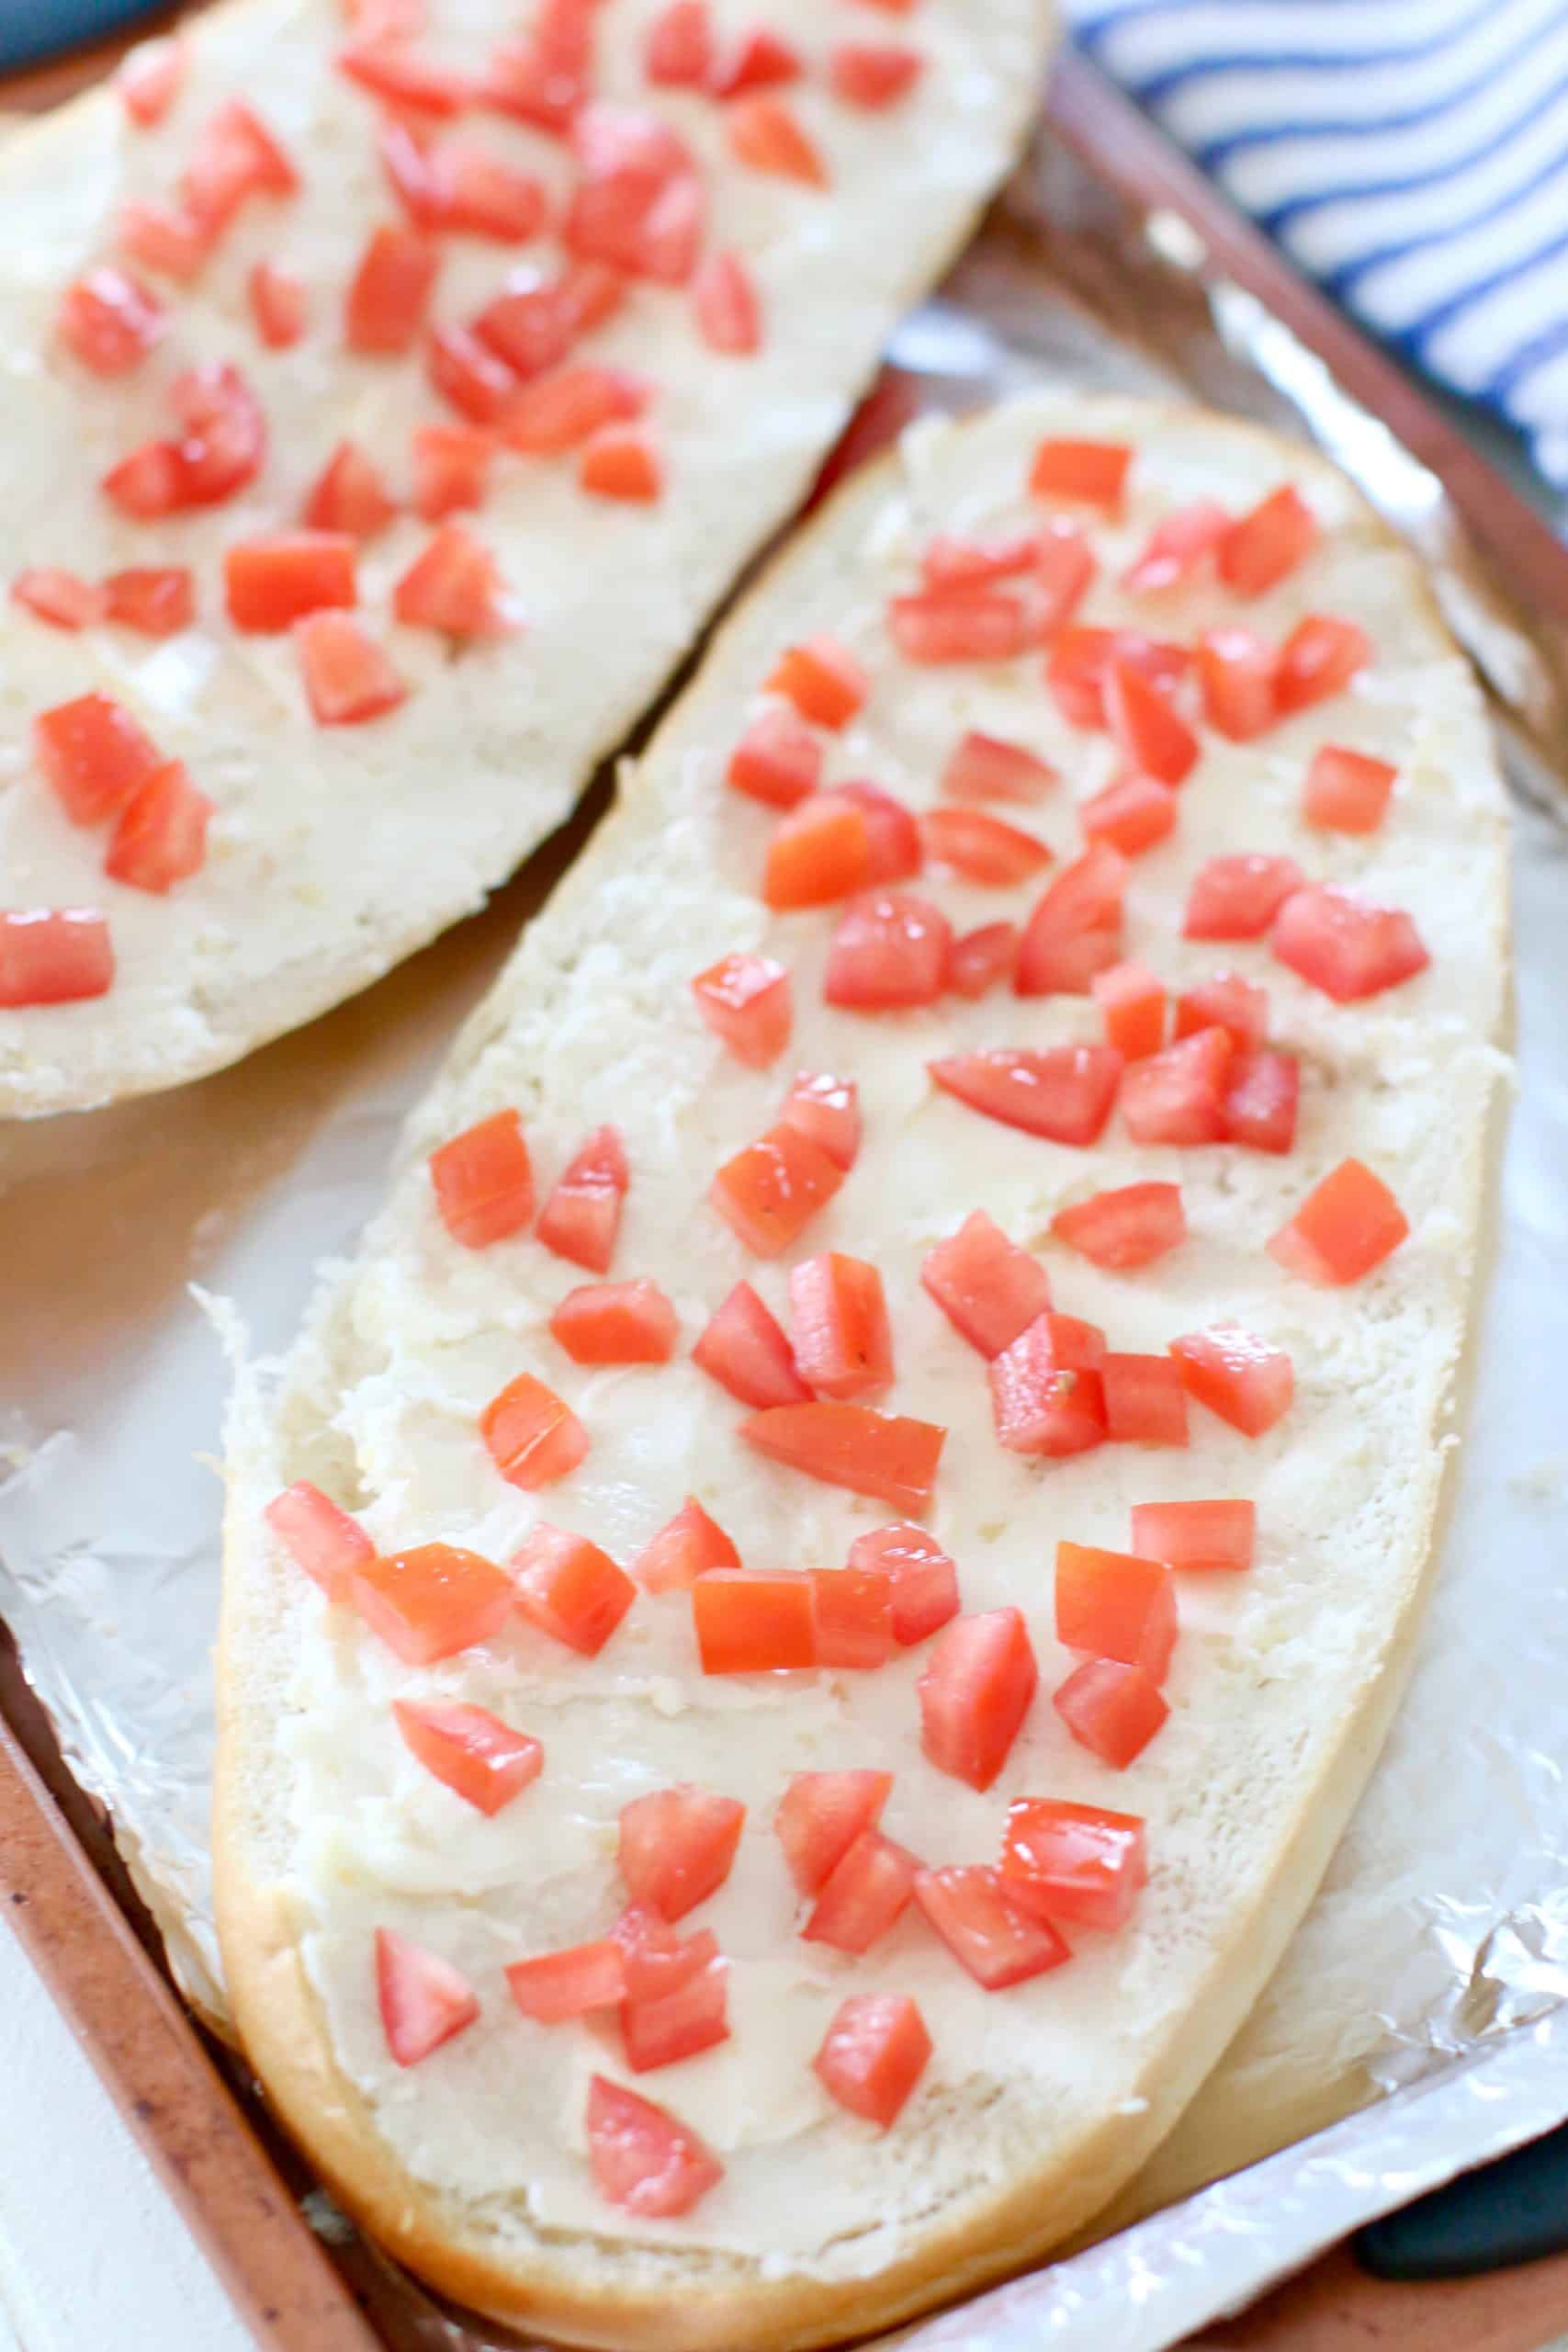 diced tomatoes shown on top of buttered bread.